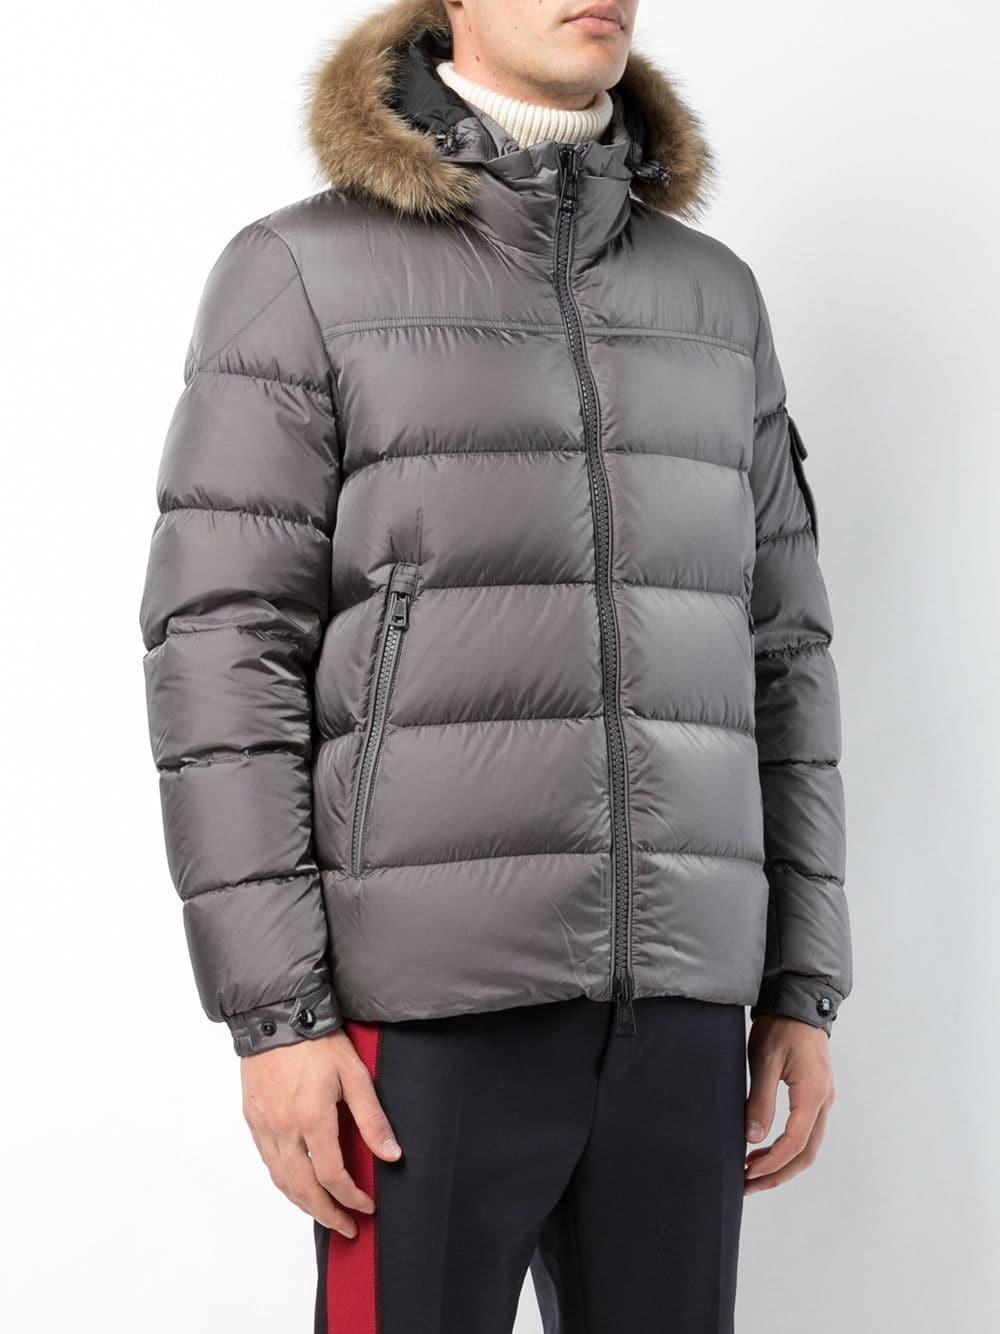 Moncler Synthetic Fur Trimmed Padded Coat in Grey (Grey) for Men - Lyst